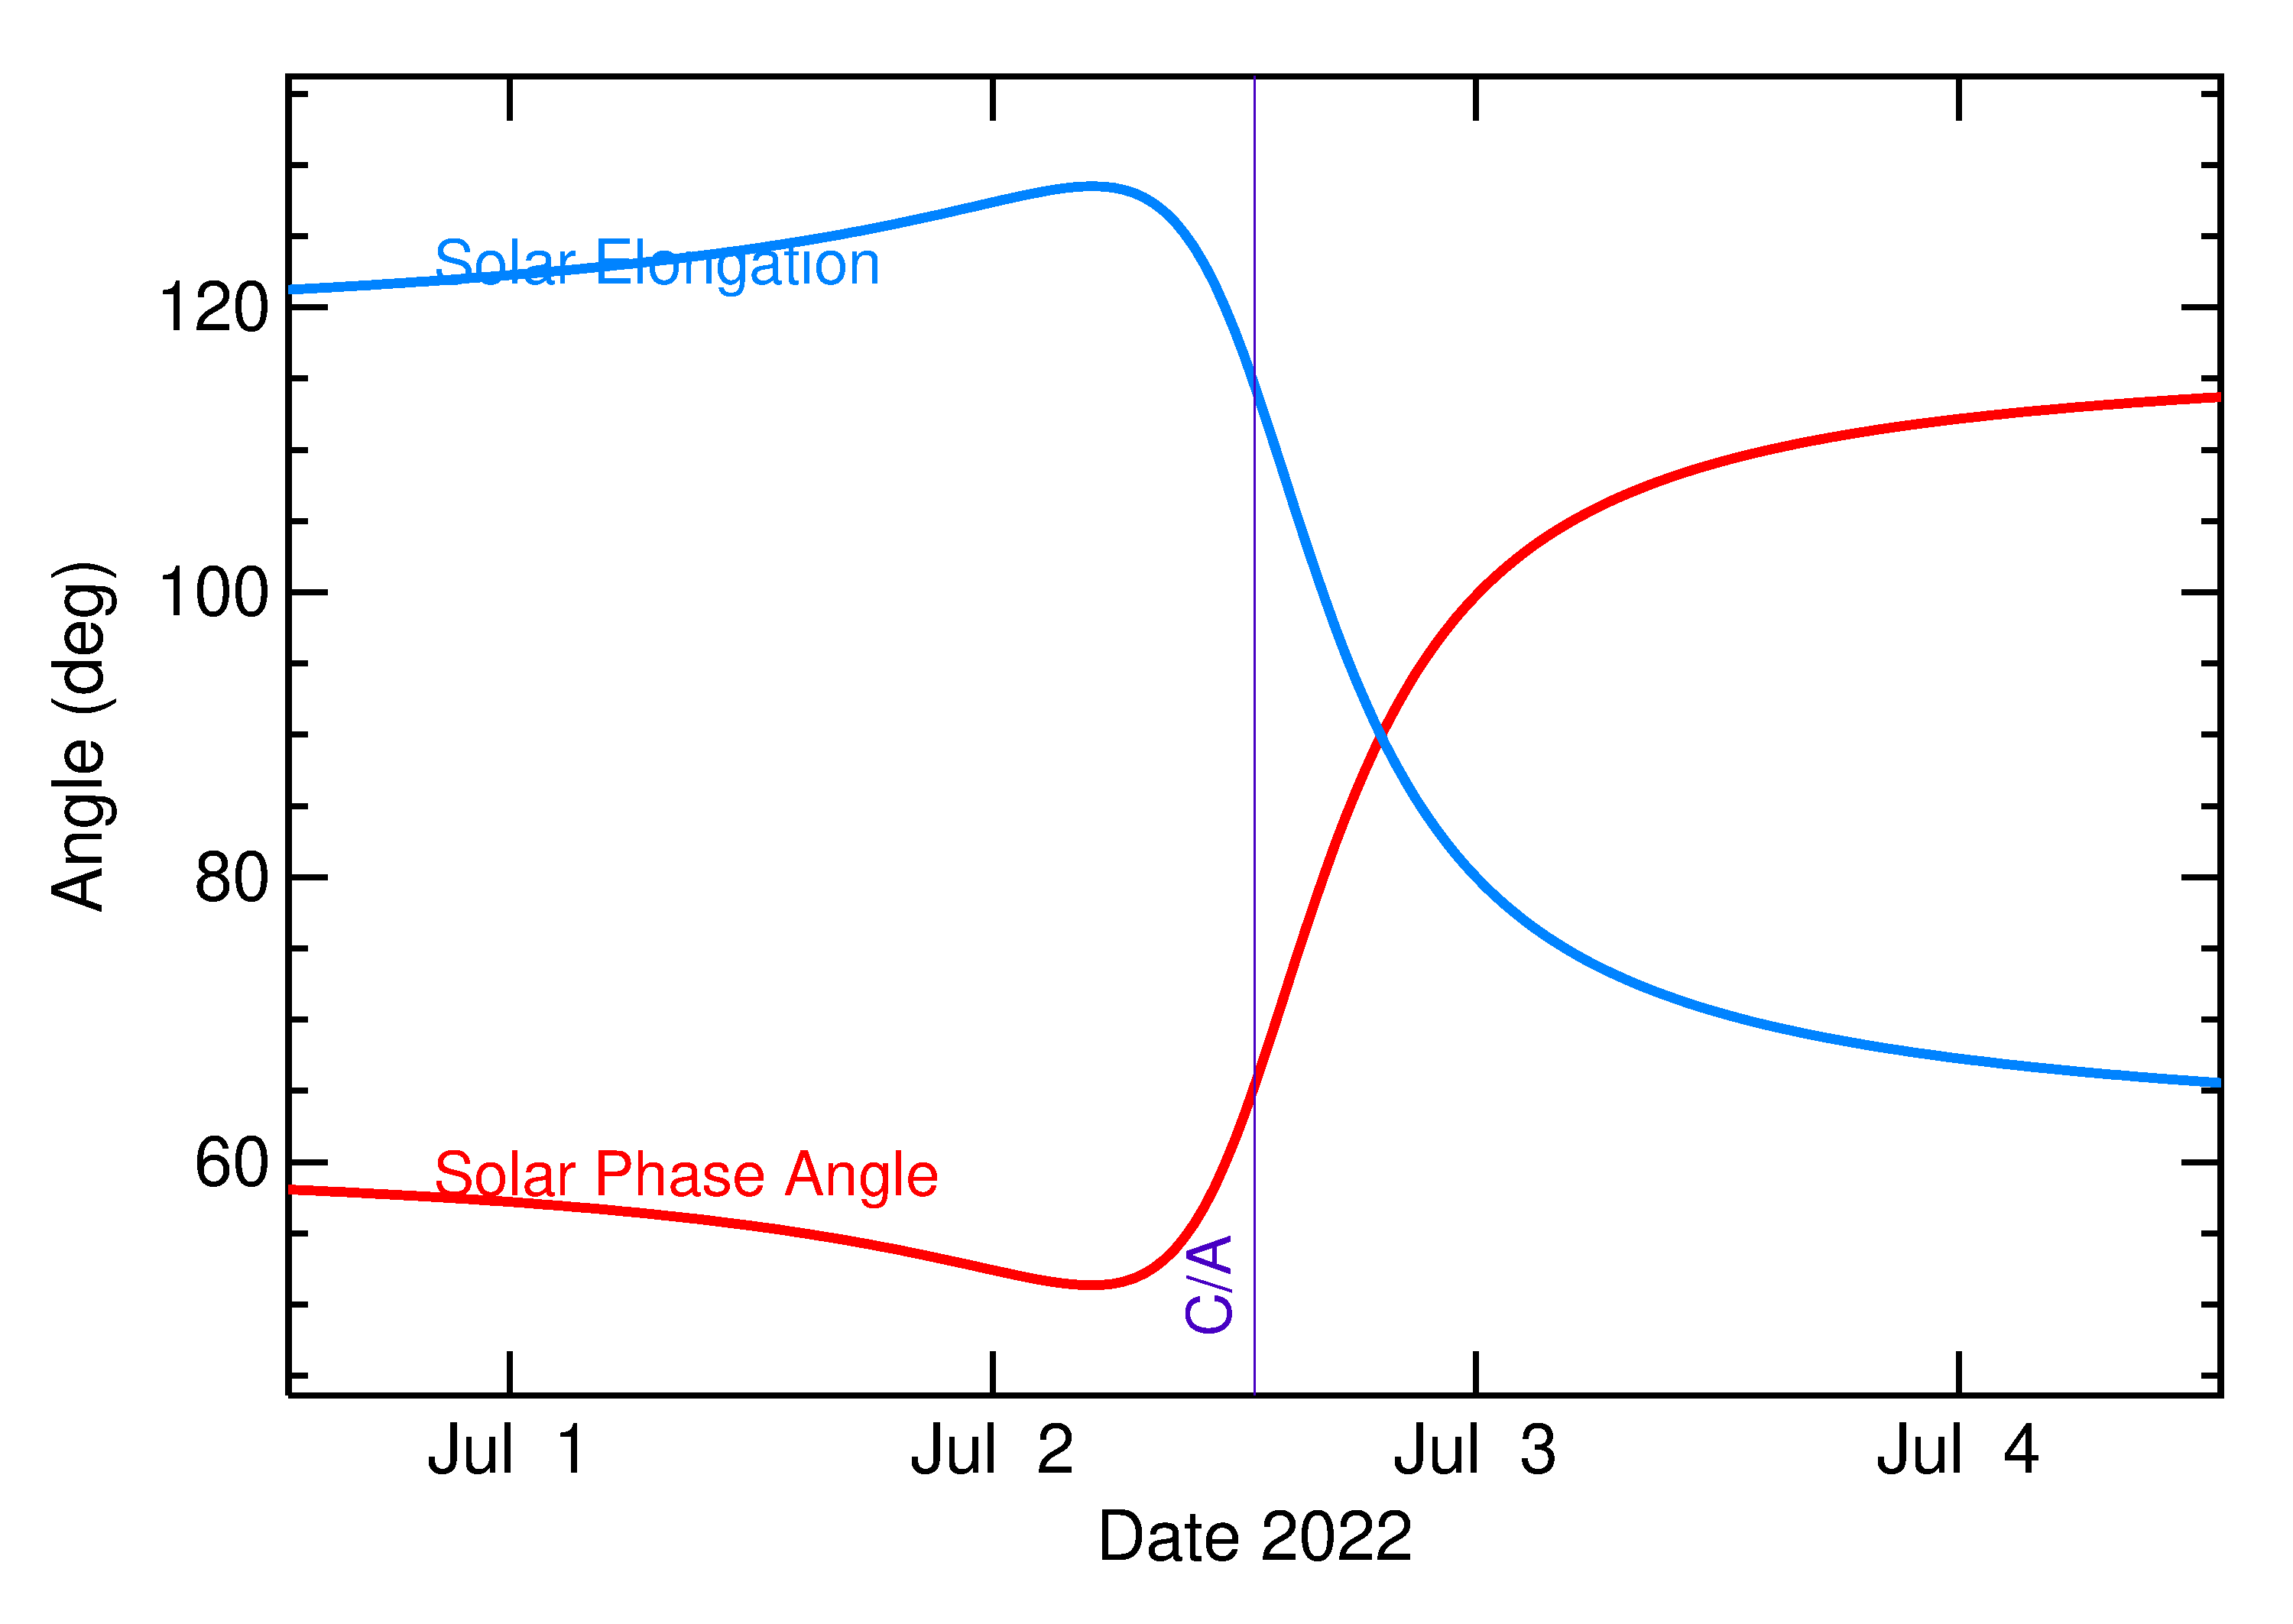 Solar Elongation and Solar Phase Angle of 2022 NK in the days around closest approach